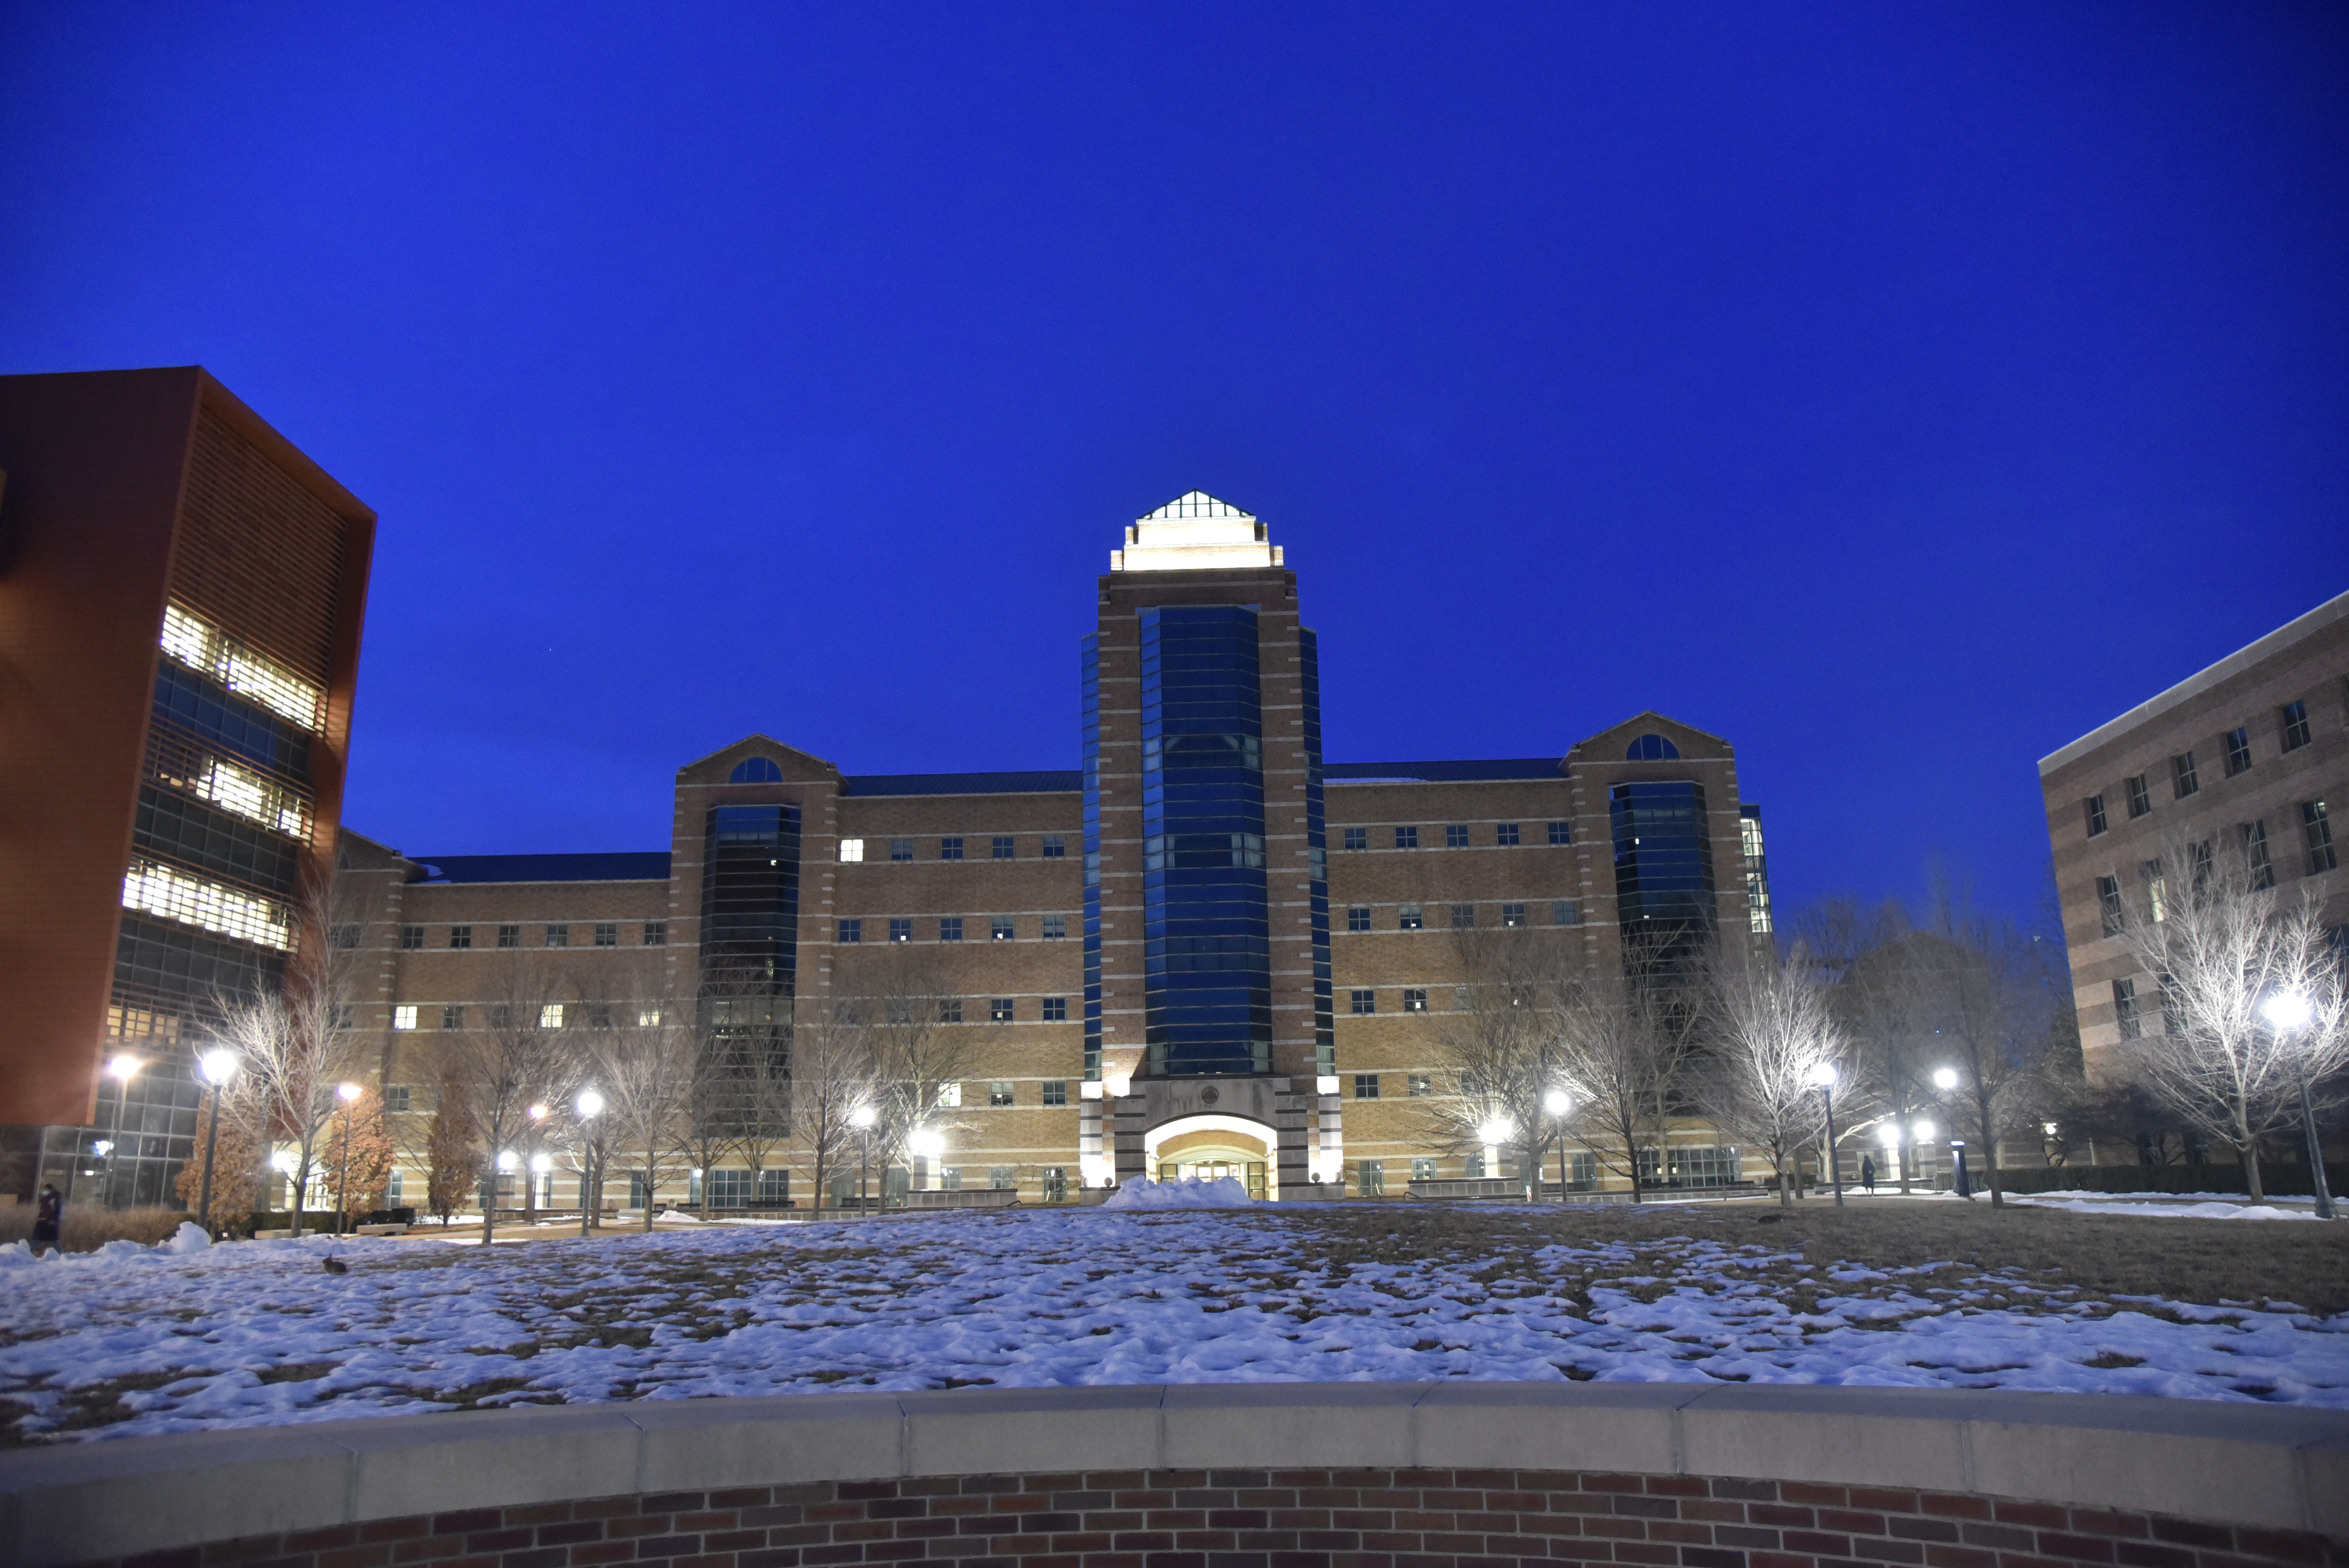 The Beckman Tower is brilliantly lit up on a snowy night by 40 LED lamps.